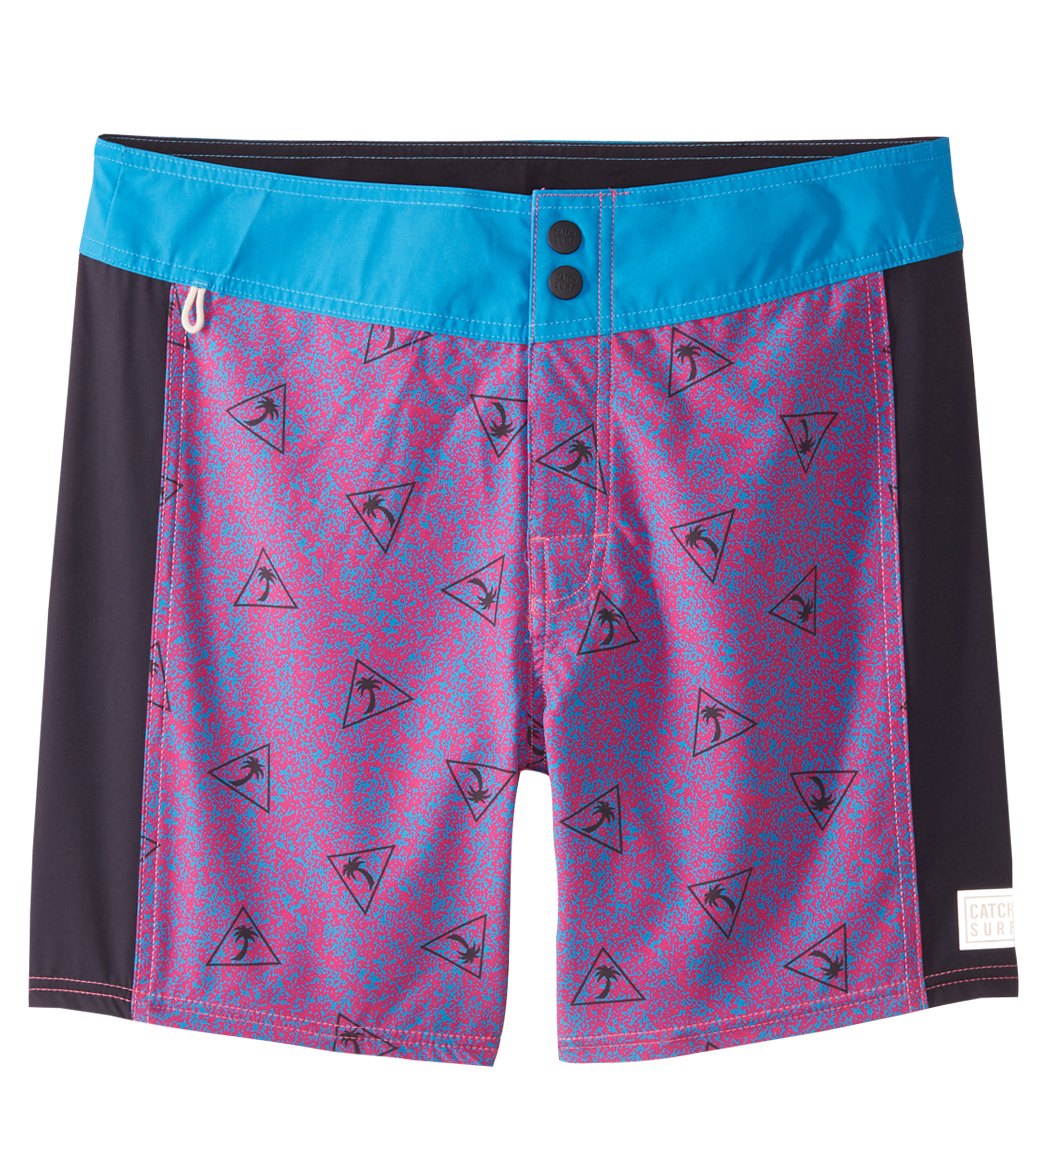 Catch Surf Men's Line Up Trunk 17 Inch - Turquoise 28 Polyester/Spandex - Swimoutlet.com